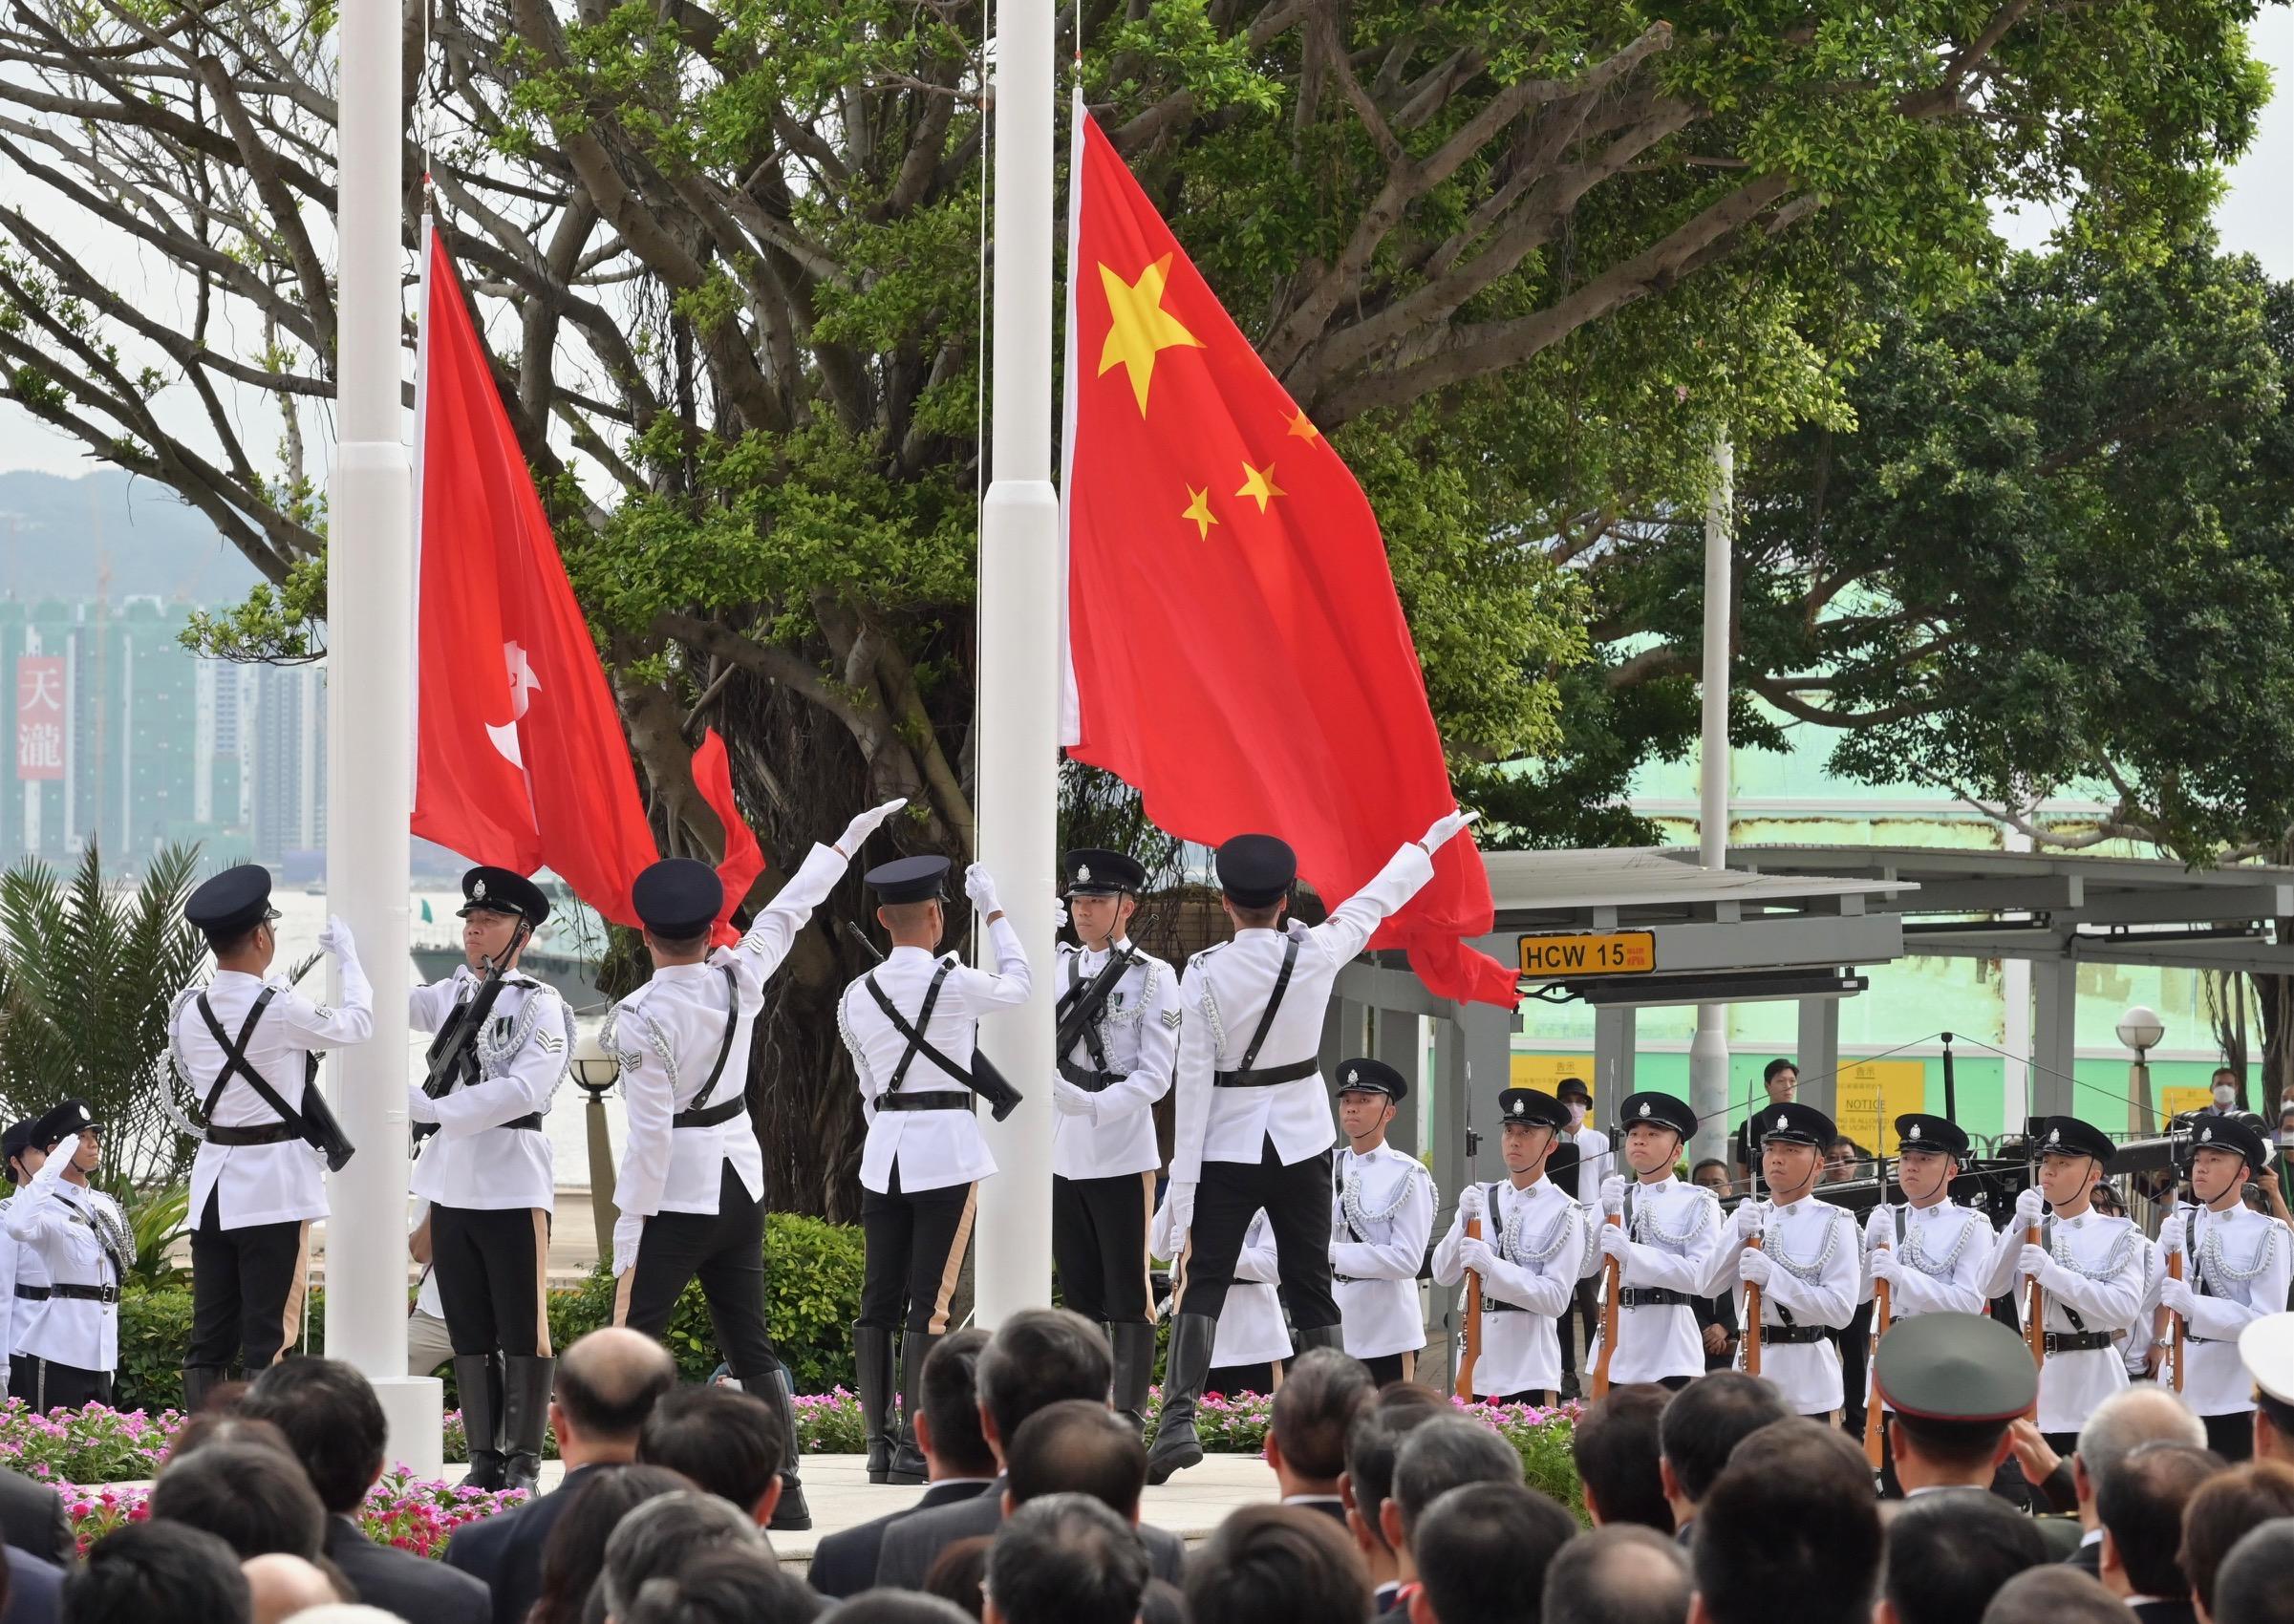 The National and Regional flags are raised at the flag-raising ceremony for the 26th anniversary of the establishment of the Hong Kong Special Administrative Region at Golden Bauhinia Square in Wan Chai this morning (July 1).